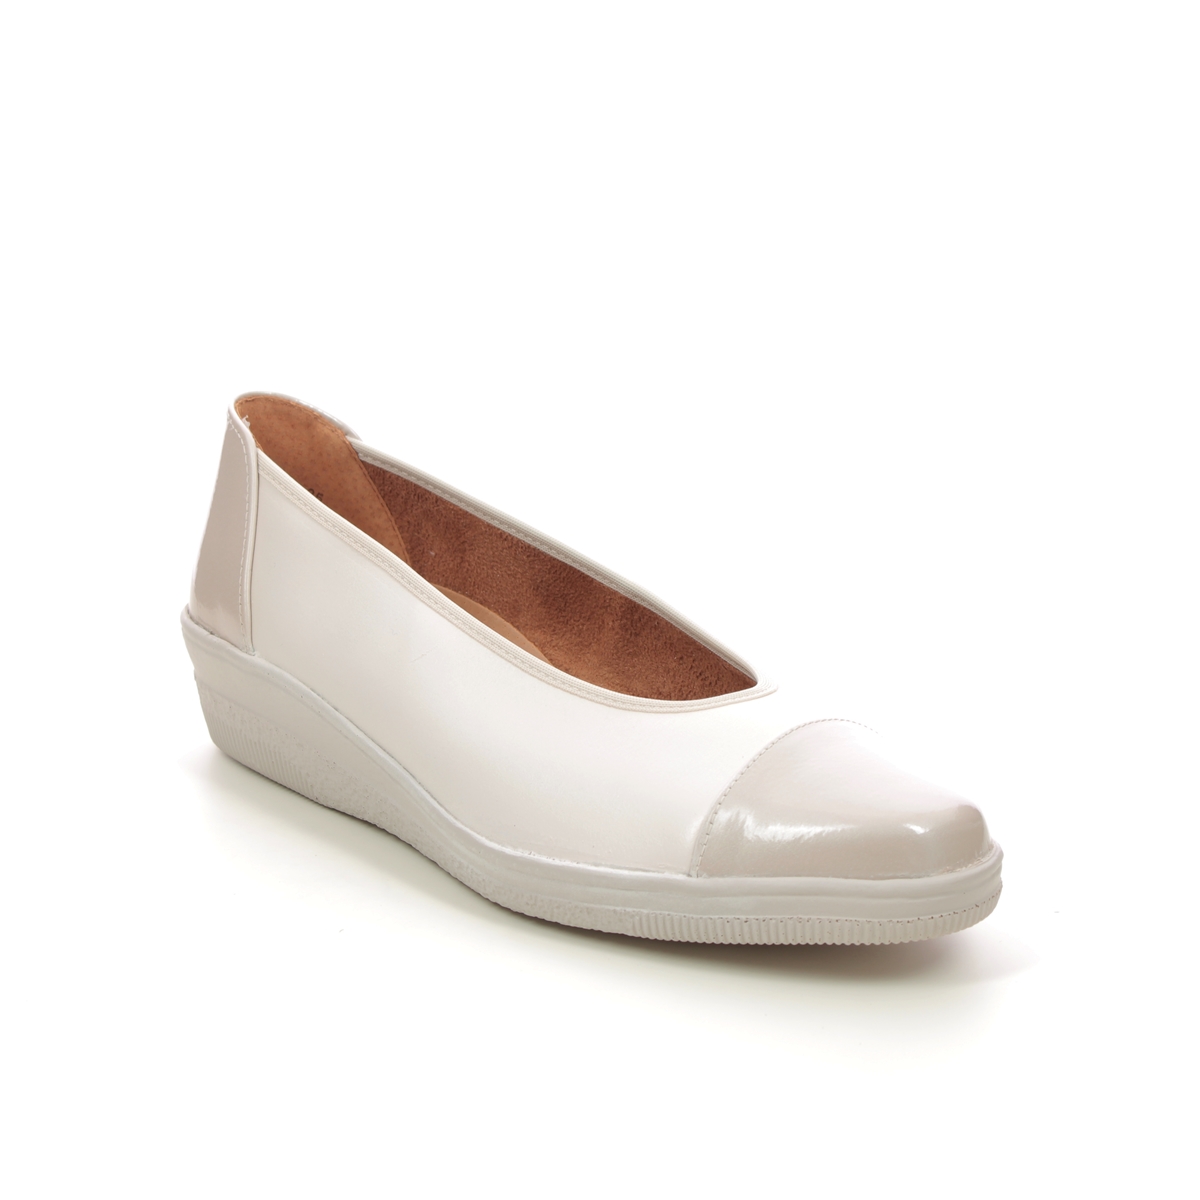 Gabor Petunia Beige Womens Comfort Slip On Shoes 26.042.53 in a Plain Leather and Man-made in Size 4.5